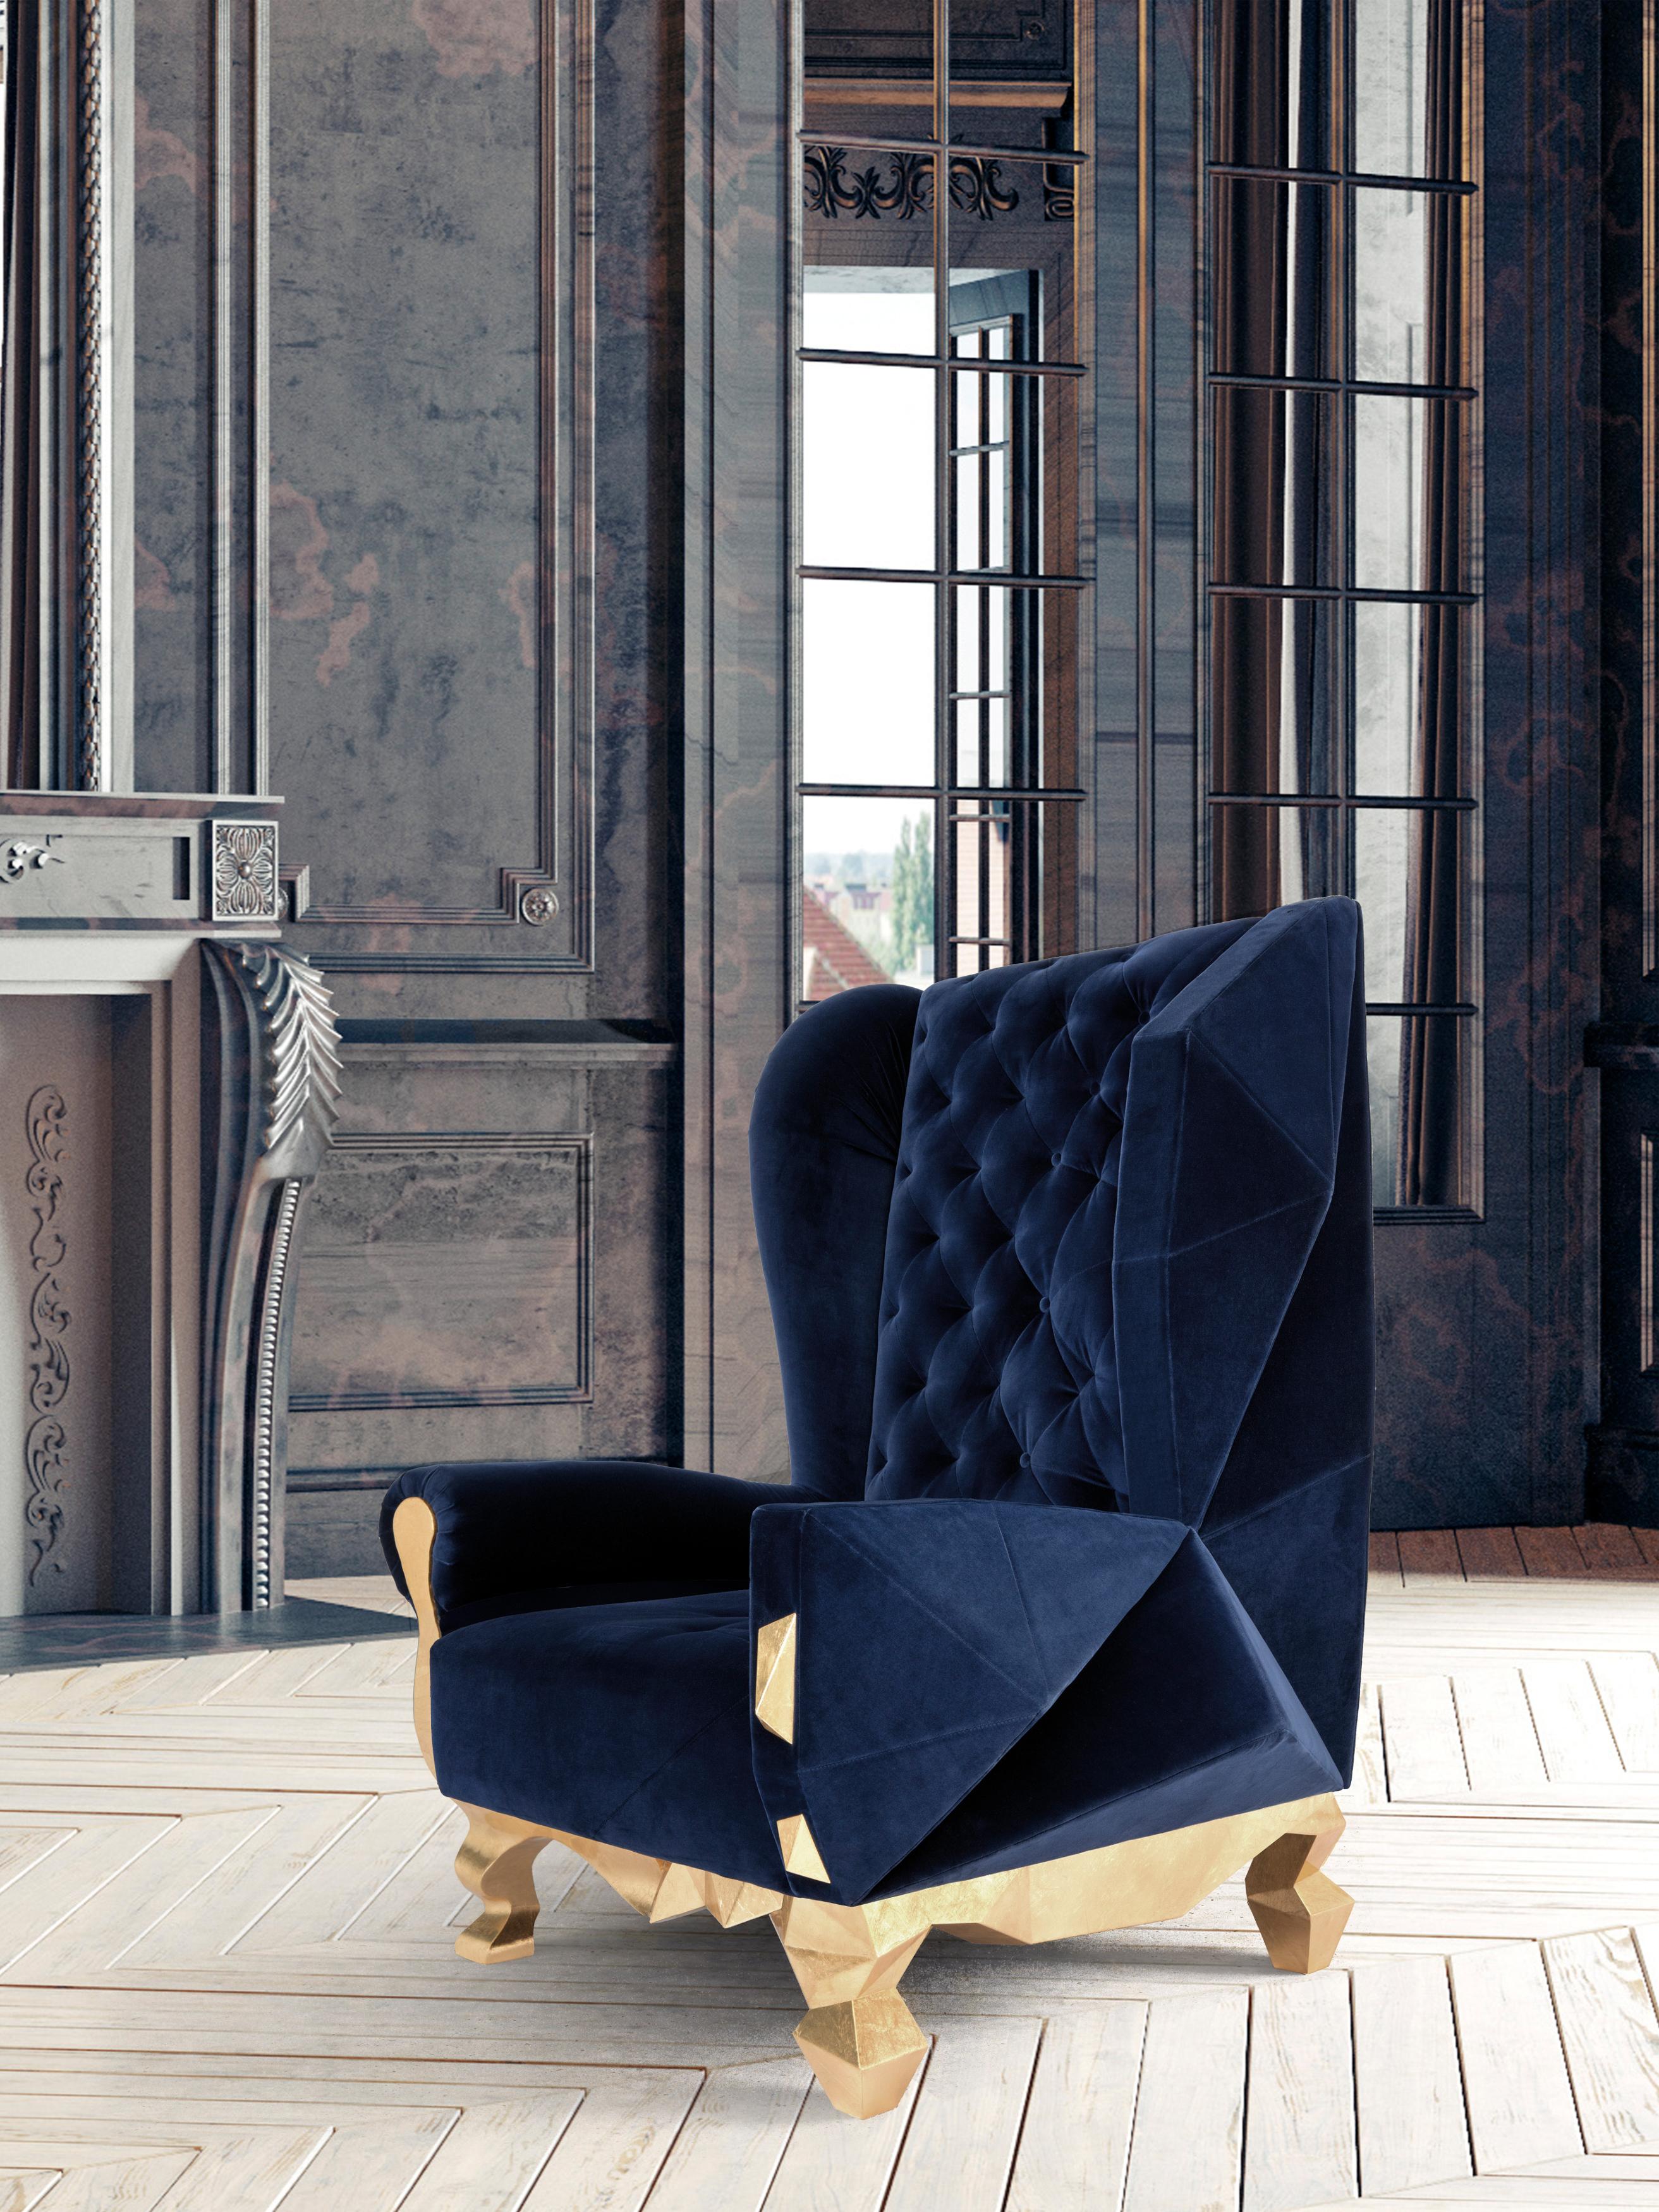 Velvet blue rockchair by Royal Stranger
Dimensions: Width 98cm, height 135cm, depth 99cm
Different upholstery colors and finishes are available. Brass, copper or stainless steel in polished or brushed finish.
Materials: velvet on the top of the